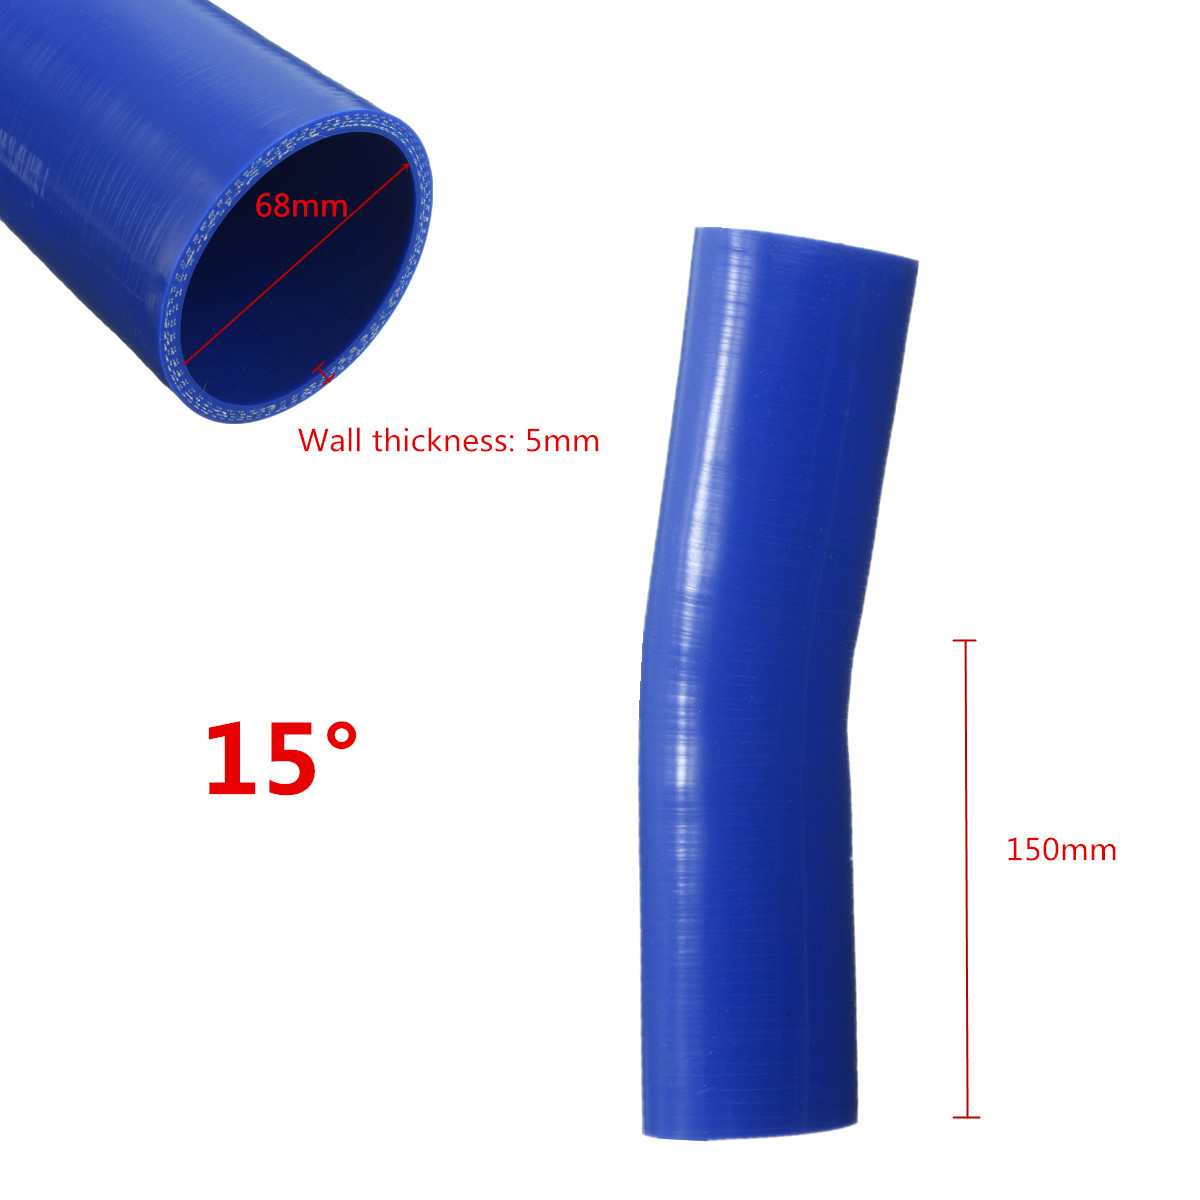 150mm-Silicone-Hose-Rubber-15-Degree-Elbow-Bend-Hose-Air-Water-Coolant-Joiner-Pipe-Tube-1587657-6